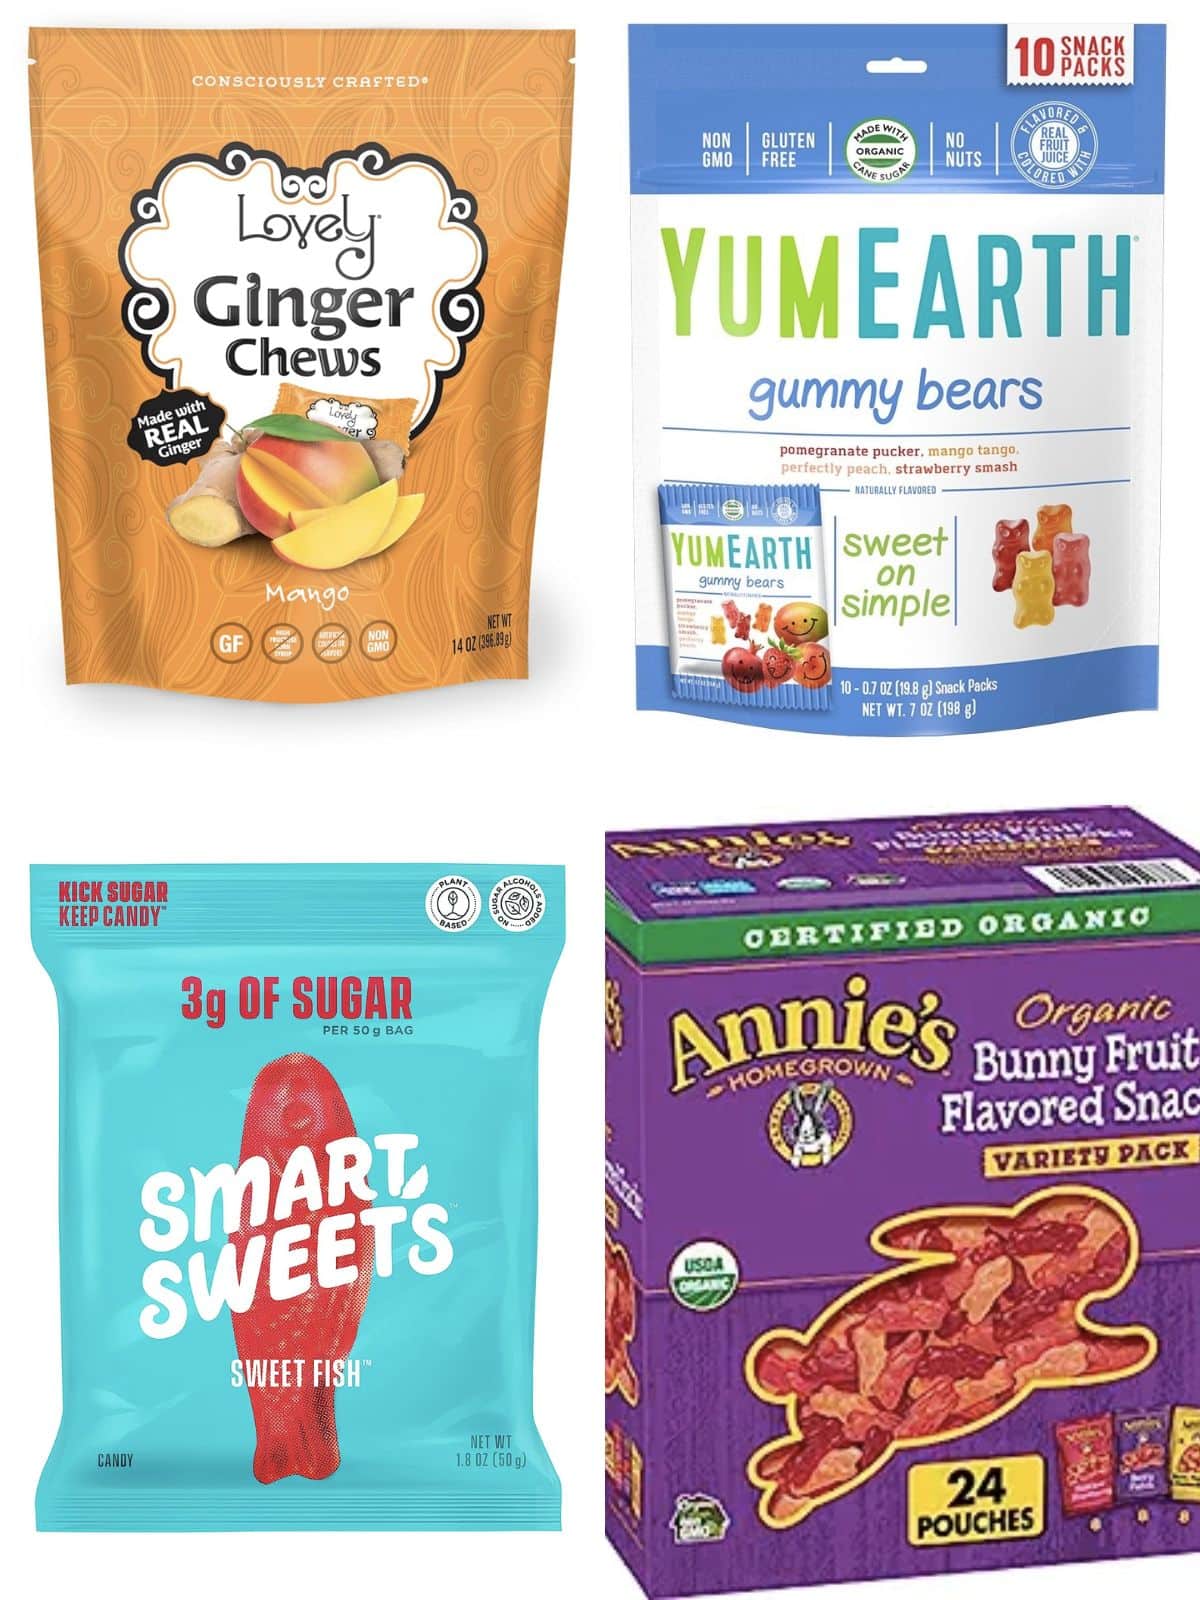 Vegan chewy candies: Lovely Ginger chews, Yum Earth gummy bears, Smart Sweets fish. Annie's fruit snacks.
